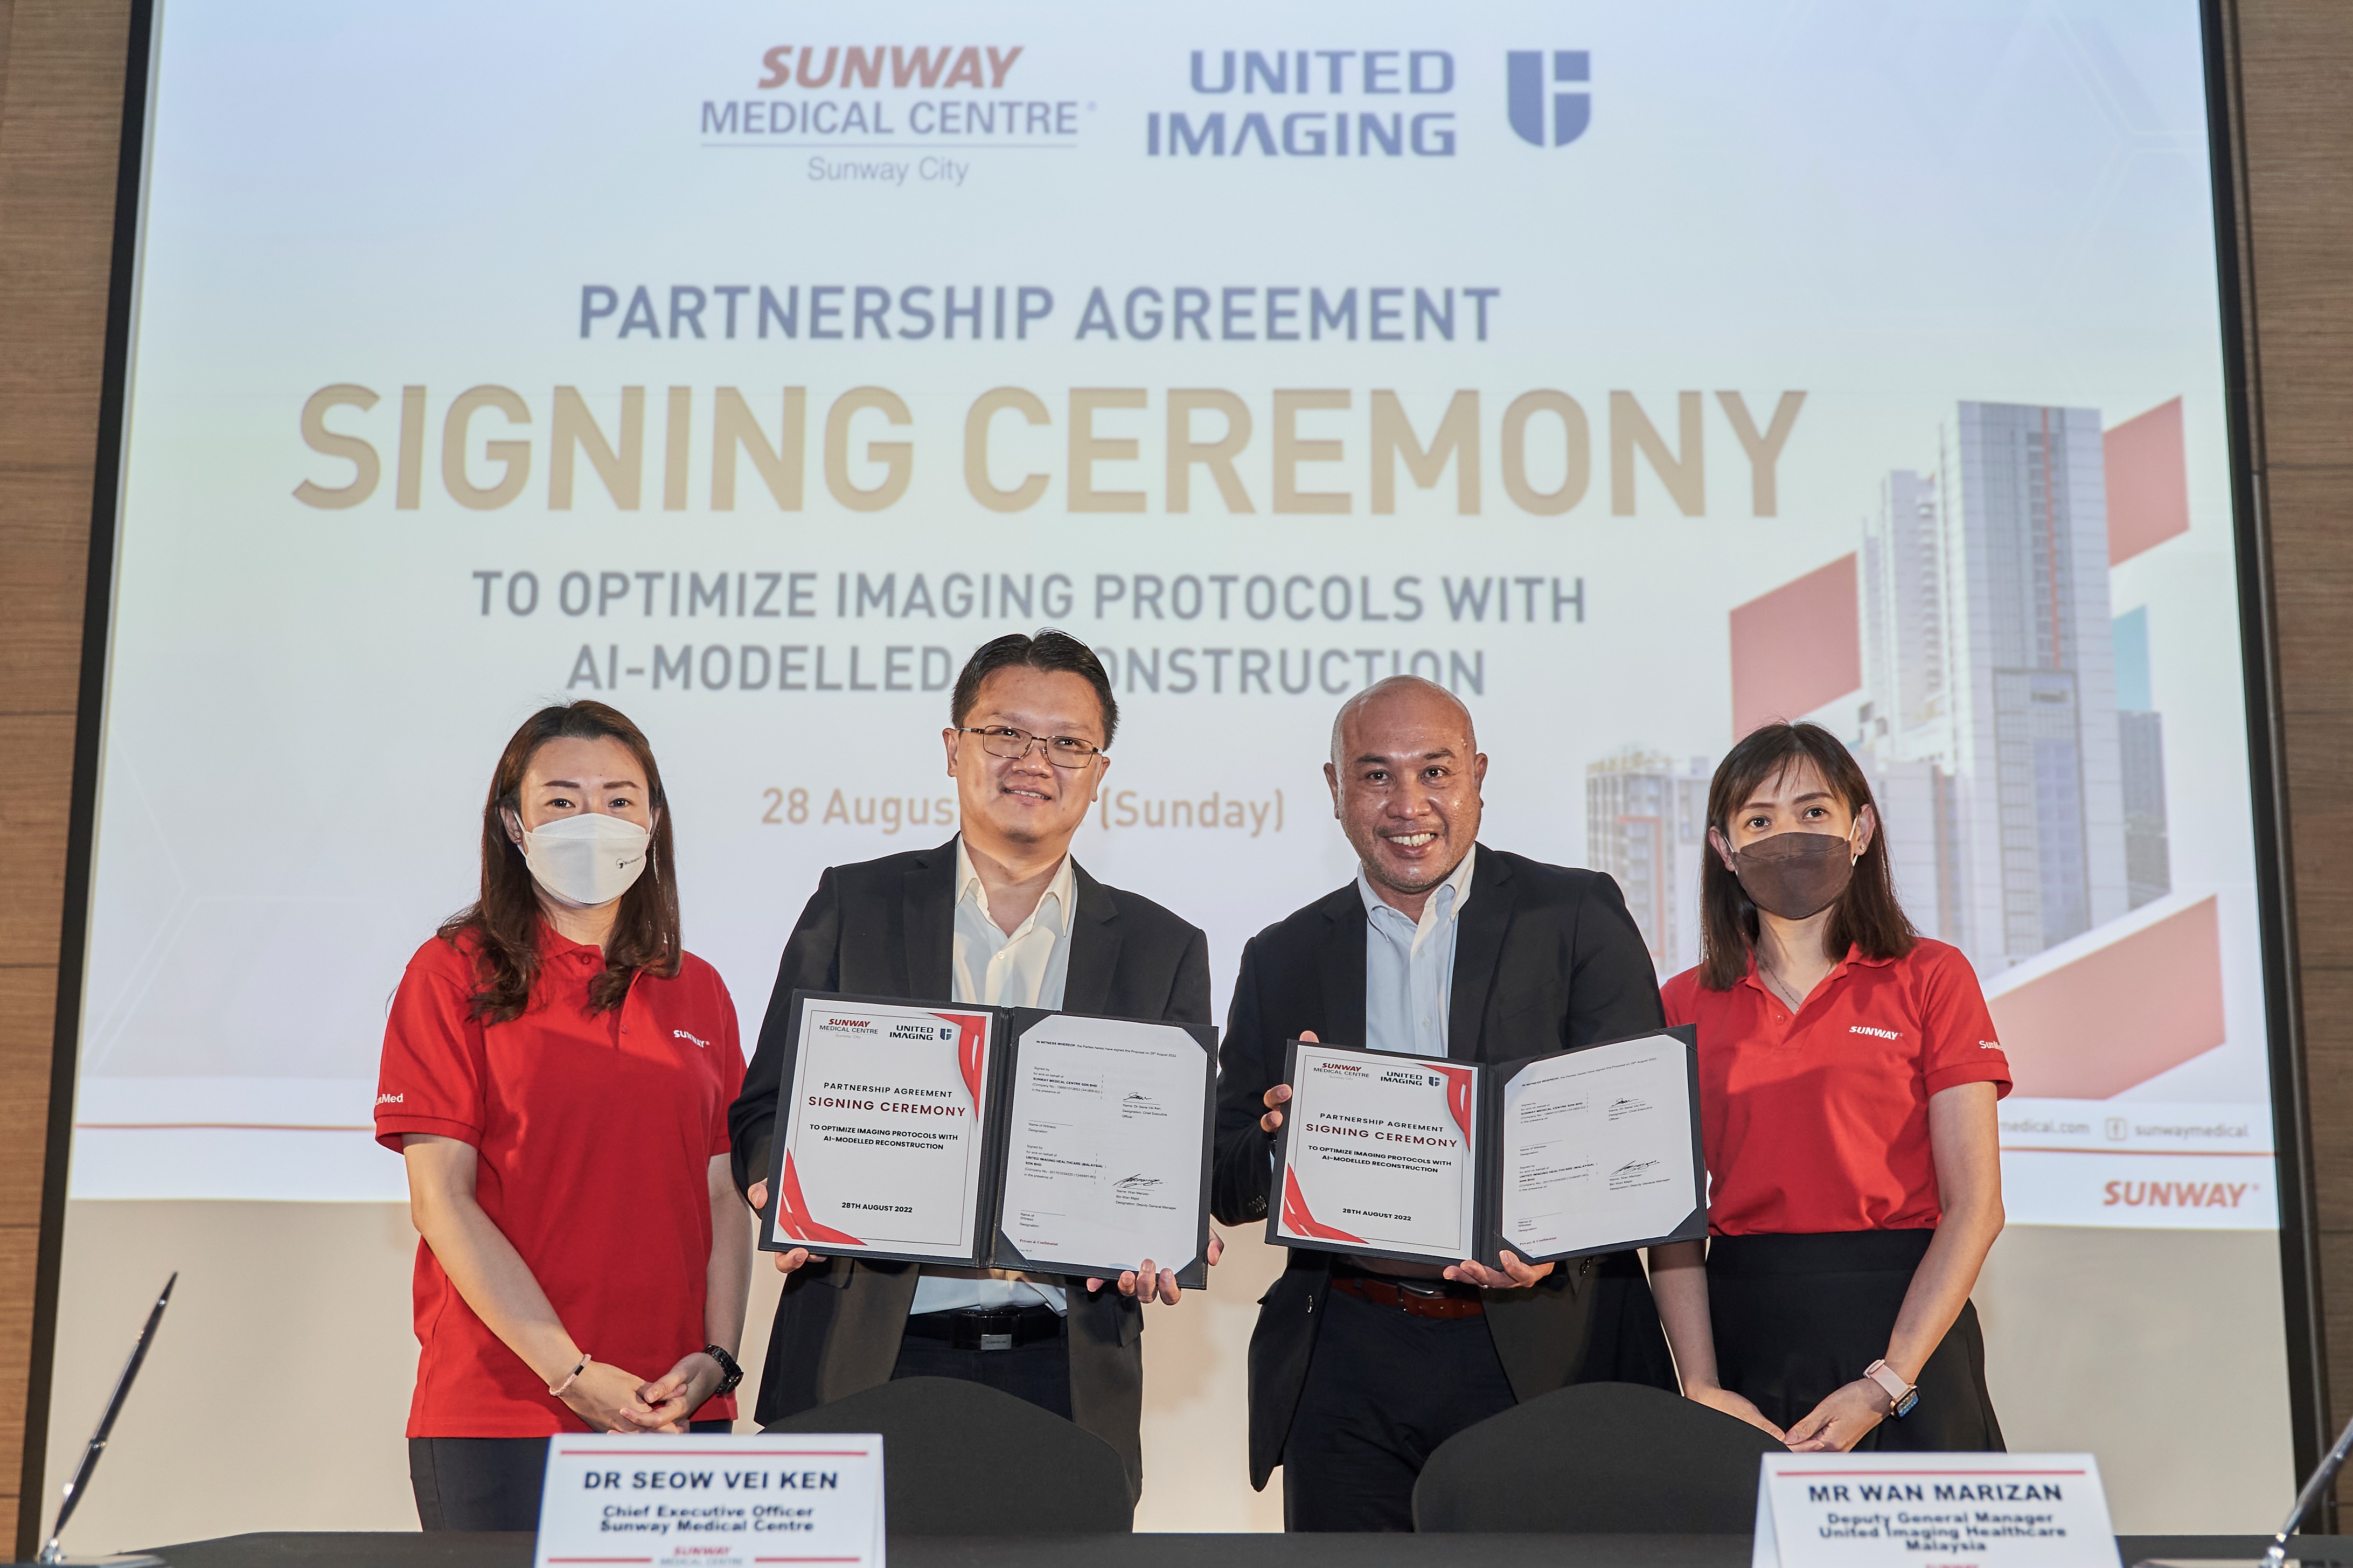 Dr Seow Vei Ken and Wan Marizan Wan Majid with United-imaging on a partnership agreement ceremony to optimise molecular imaging protocols using AI. 